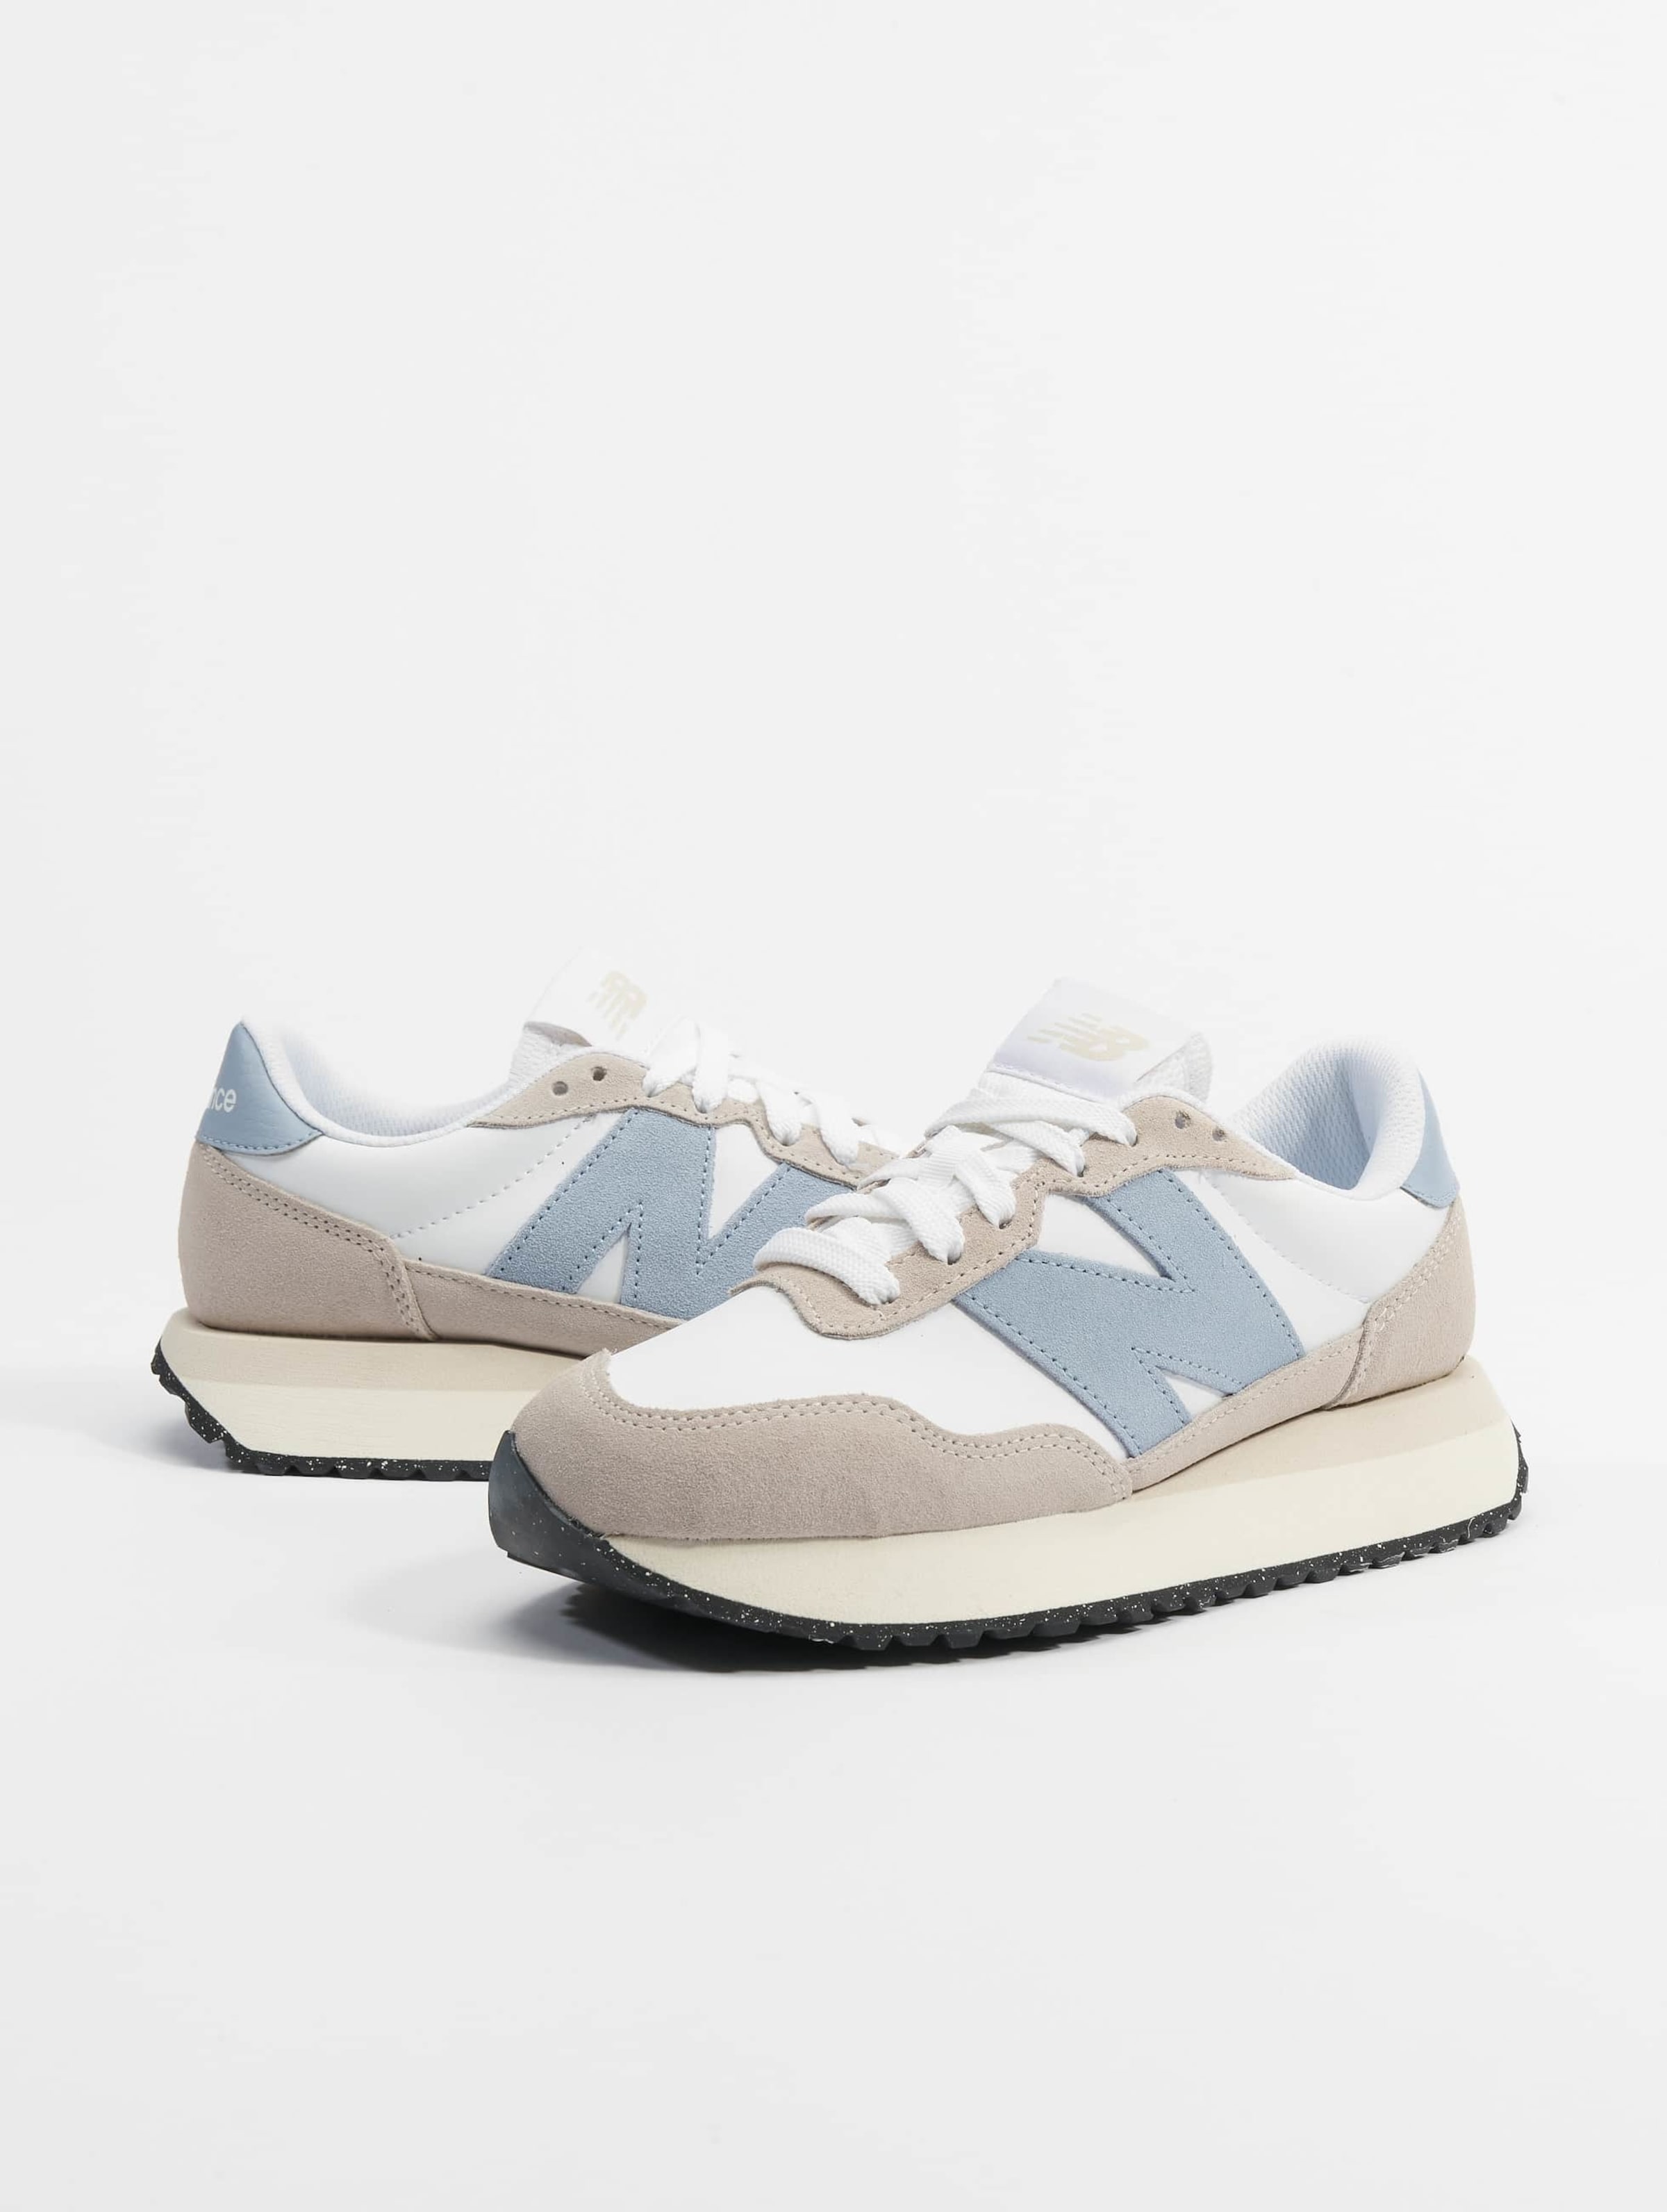 New Balance Scarpa Lifestyle Donna Suede Textile Sneakers Vrouwen op kleur wit, Maat 39